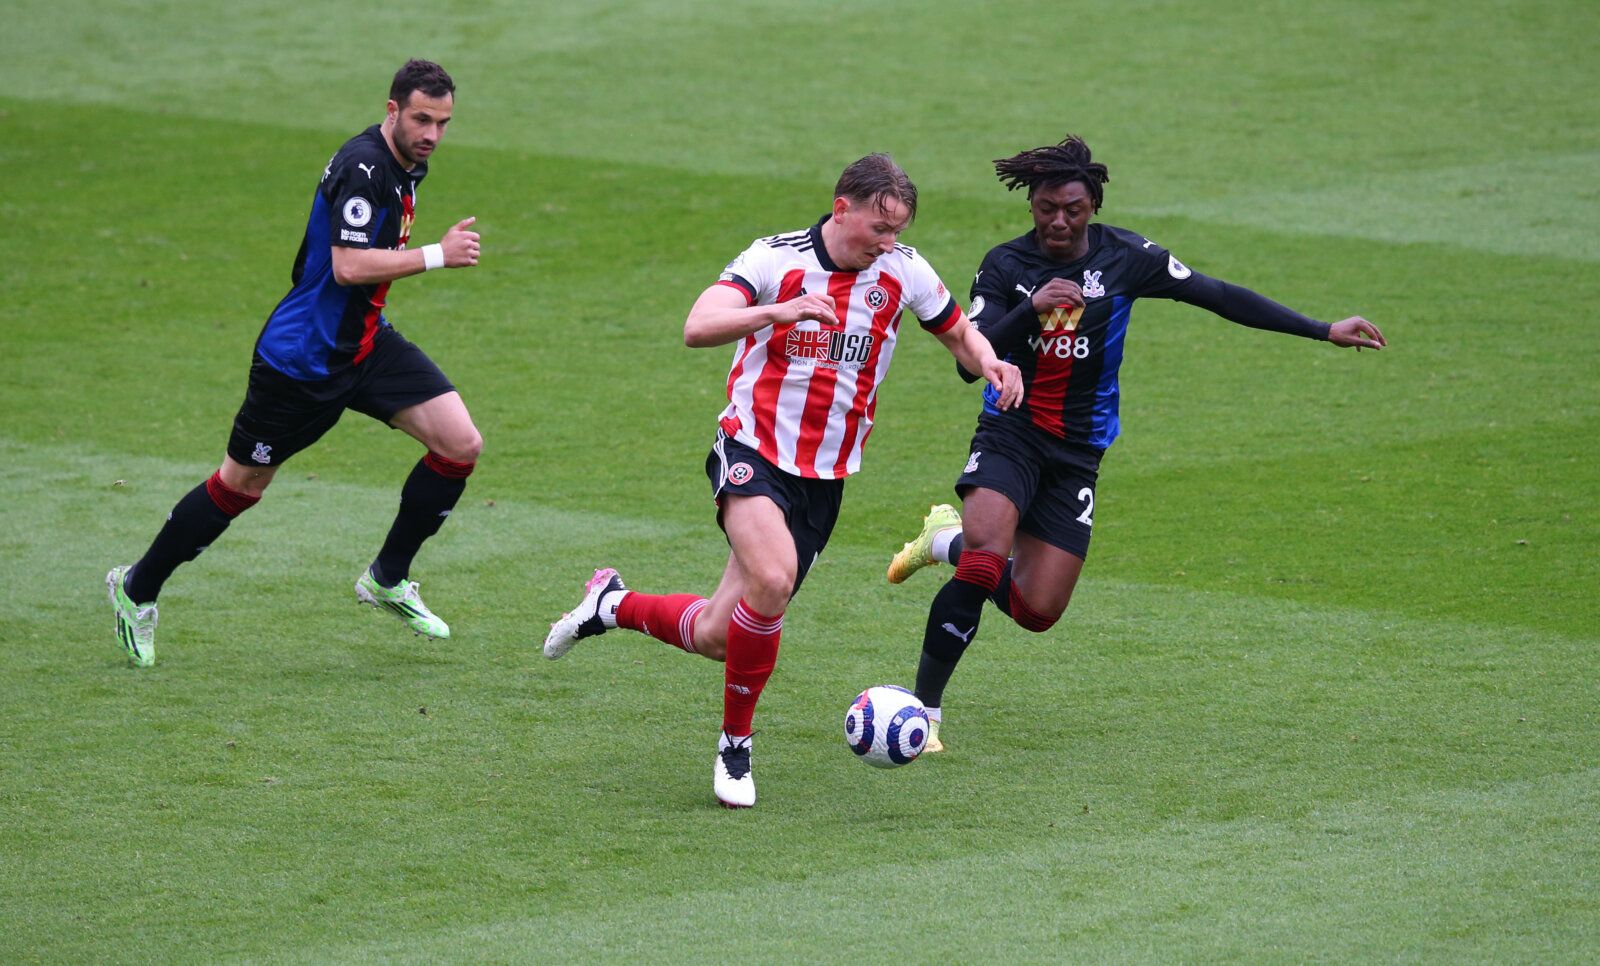 Soccer Football - Premier League - Sheffield United v Crystal Palace - Bramall Lane, Sheffield, Britain - May 8, 2021 Sheffield United's Sander Berge in action with Crystal Palace's Eberechi Eze Pool via REUTERS/Alex Livesey EDITORIAL USE ONLY. No use with unauthorized audio, video, data, fixture lists, club/league logos or 'live' services. Online in-match use limited to 75 images, no video emulation. No use in betting, games or single club /league/player publications.  Please contact your accou